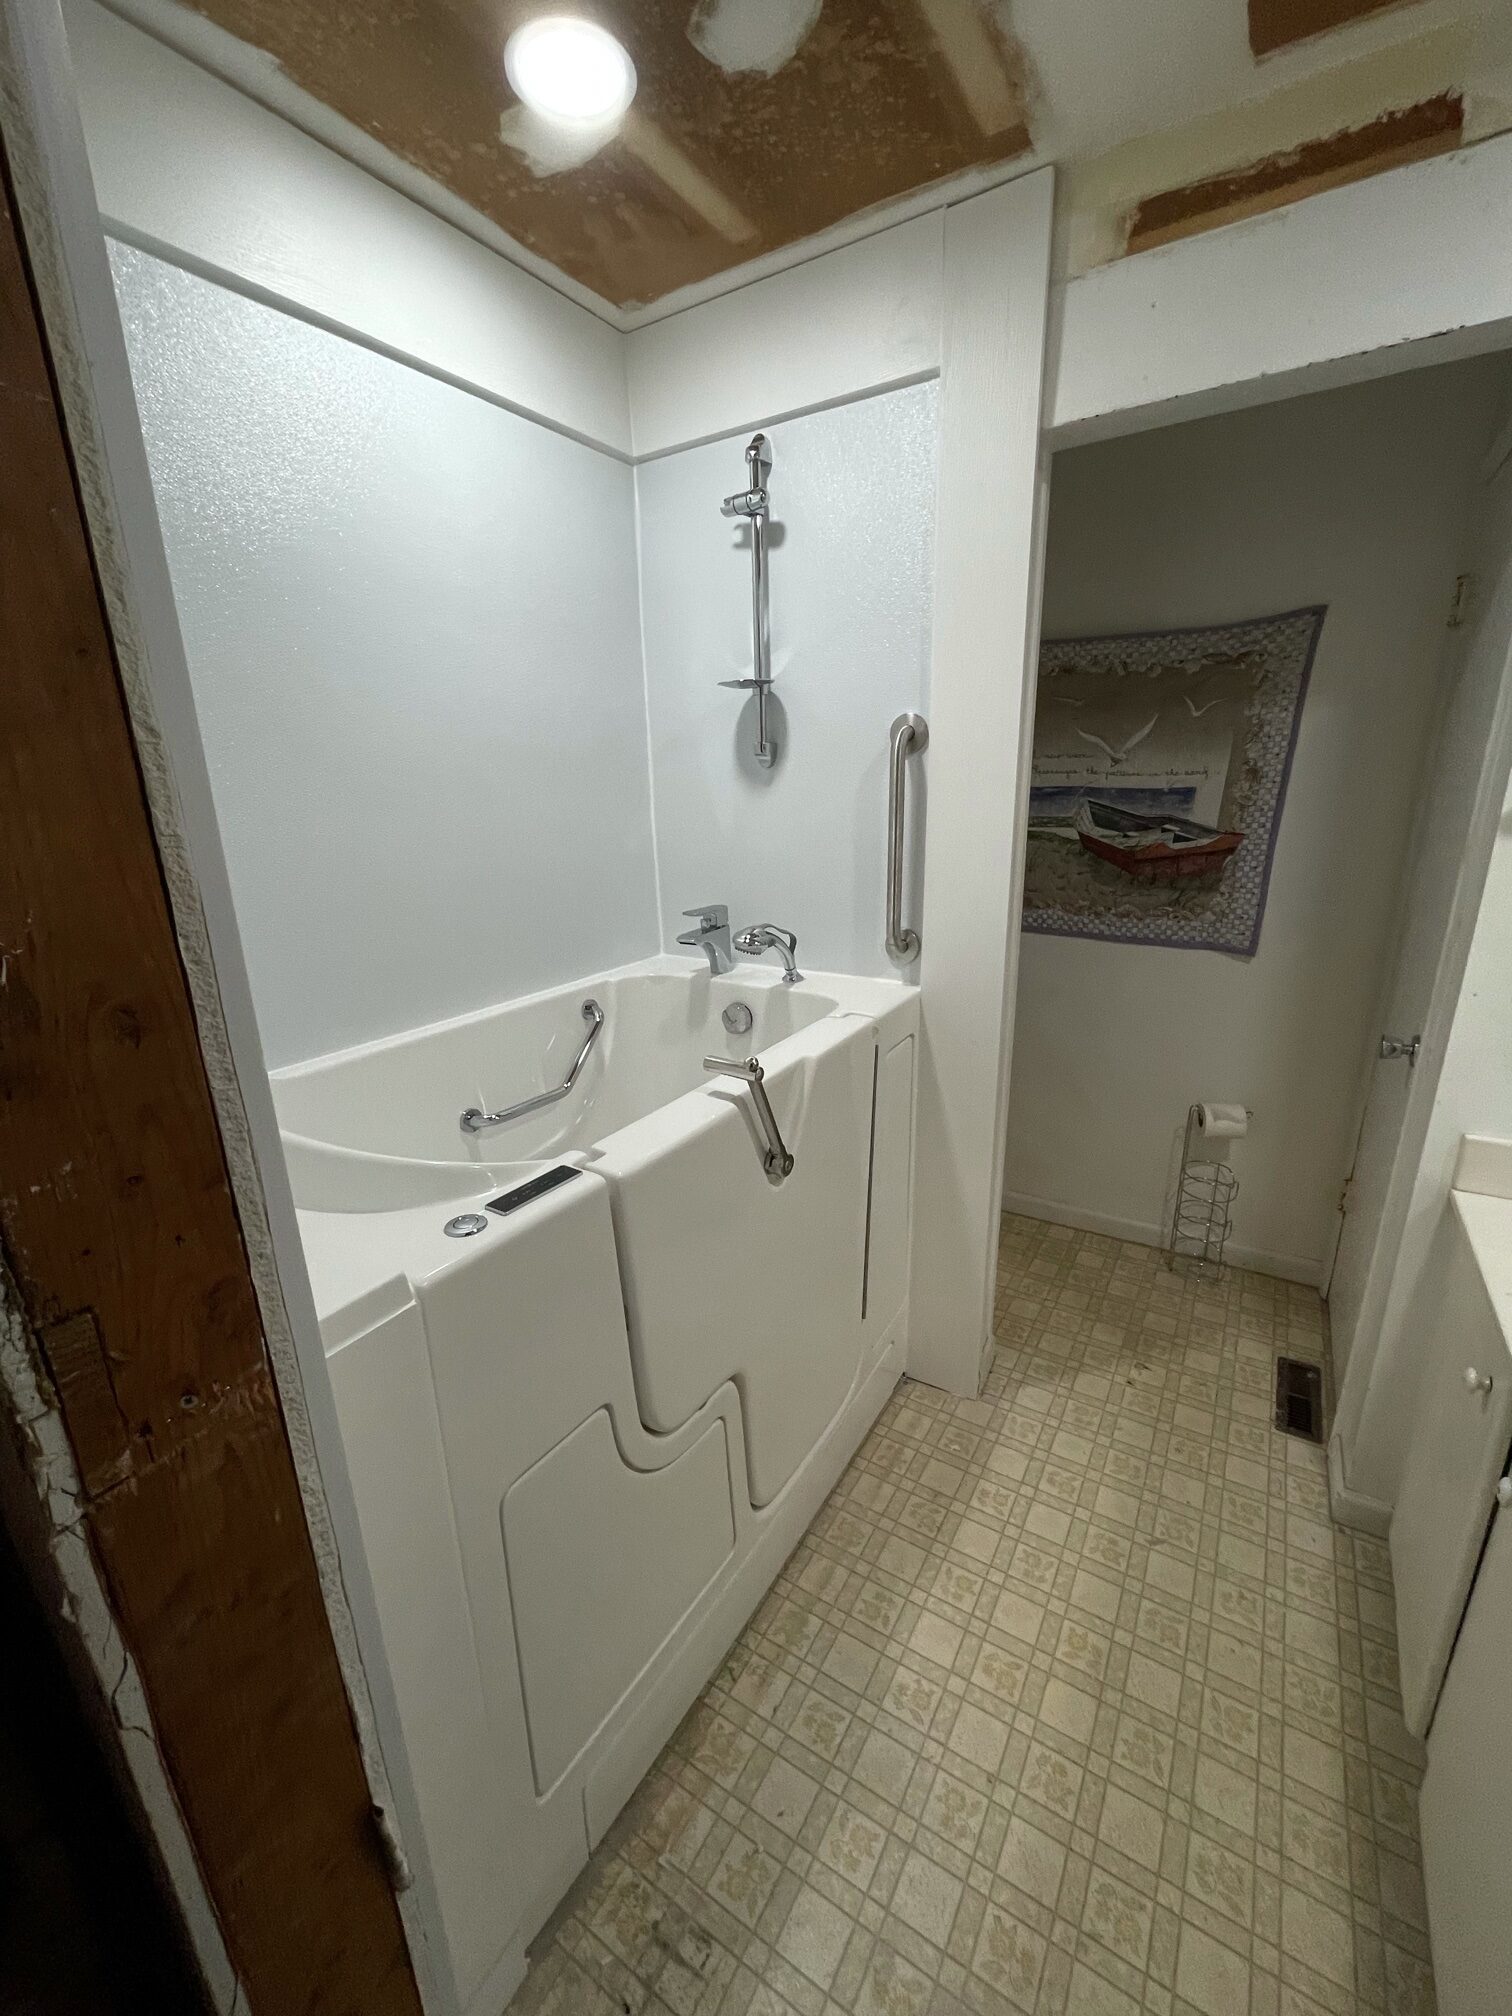 after picture of outward swing walk in tub